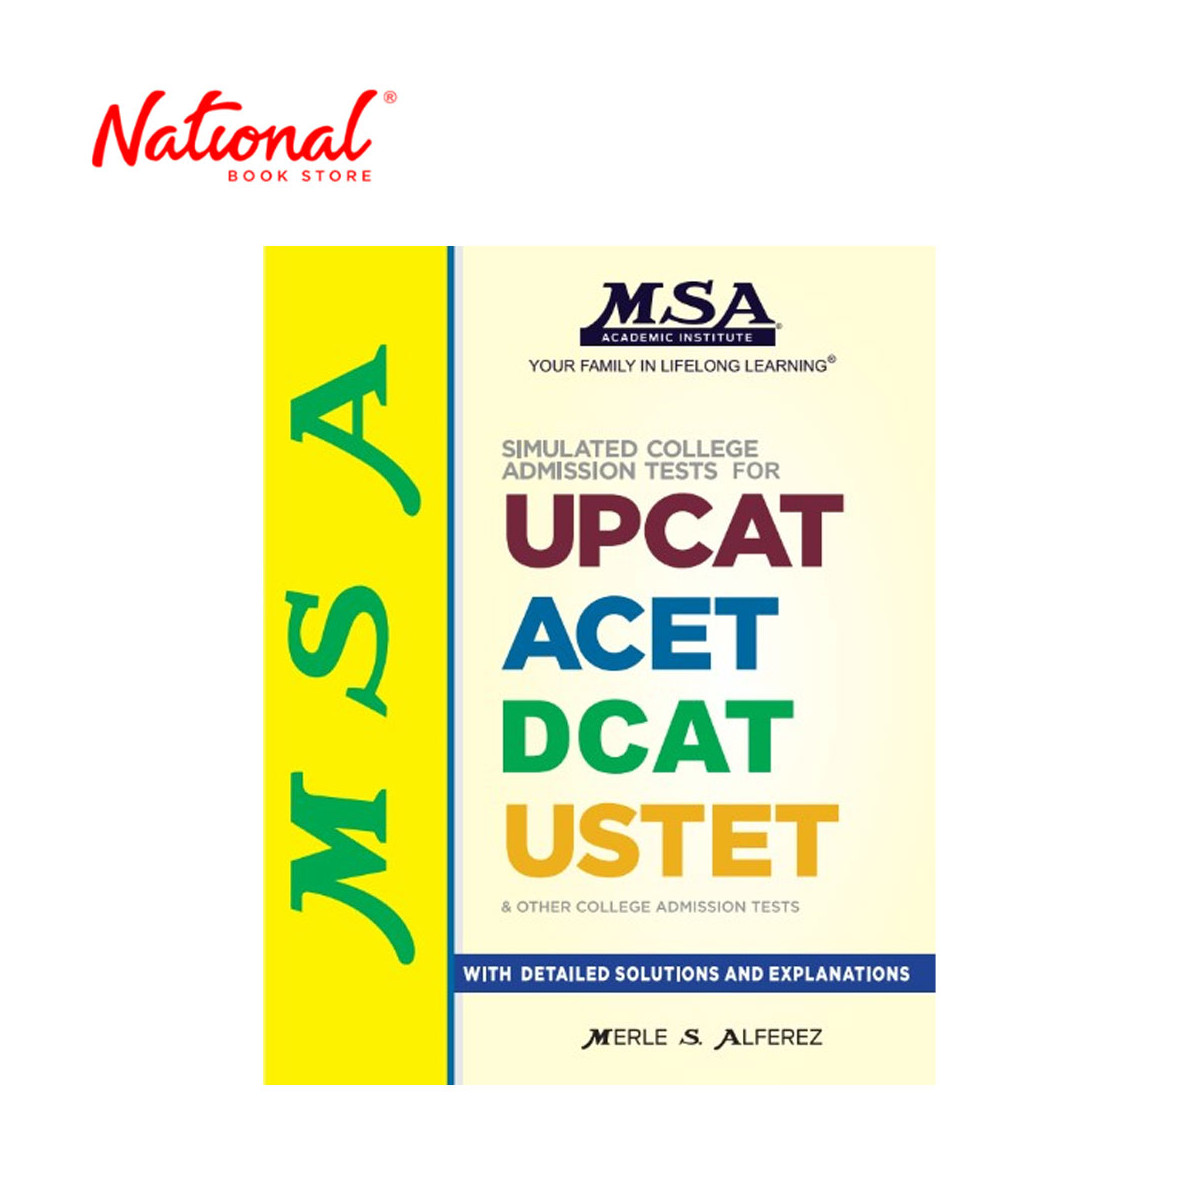 MSA Simulated College Admission Tests for UPCAT, ACET, DCAT, USTET by Merle S. Alferez